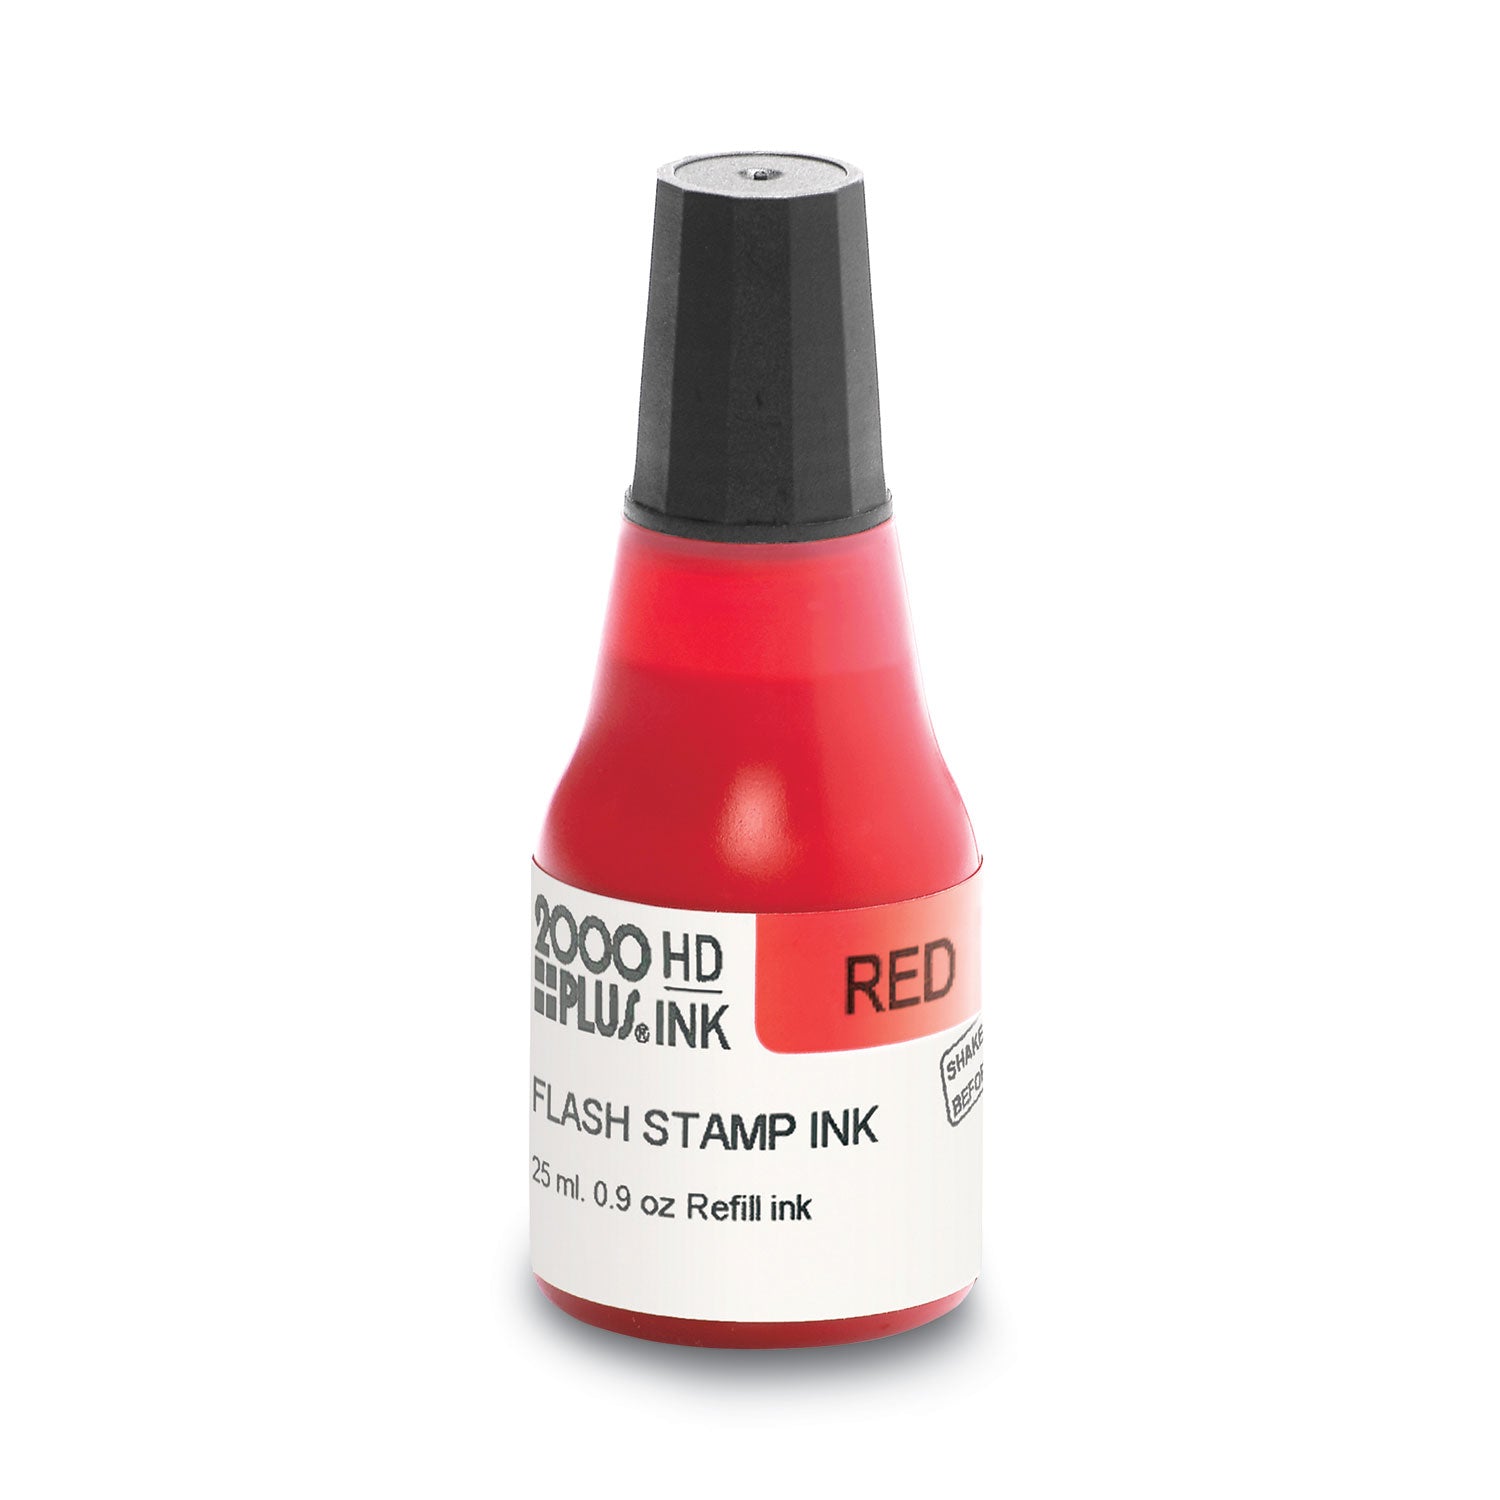 pre-ink-high-definition-refill-ink-red-09-oz-bottle-red_cos033958 - 1